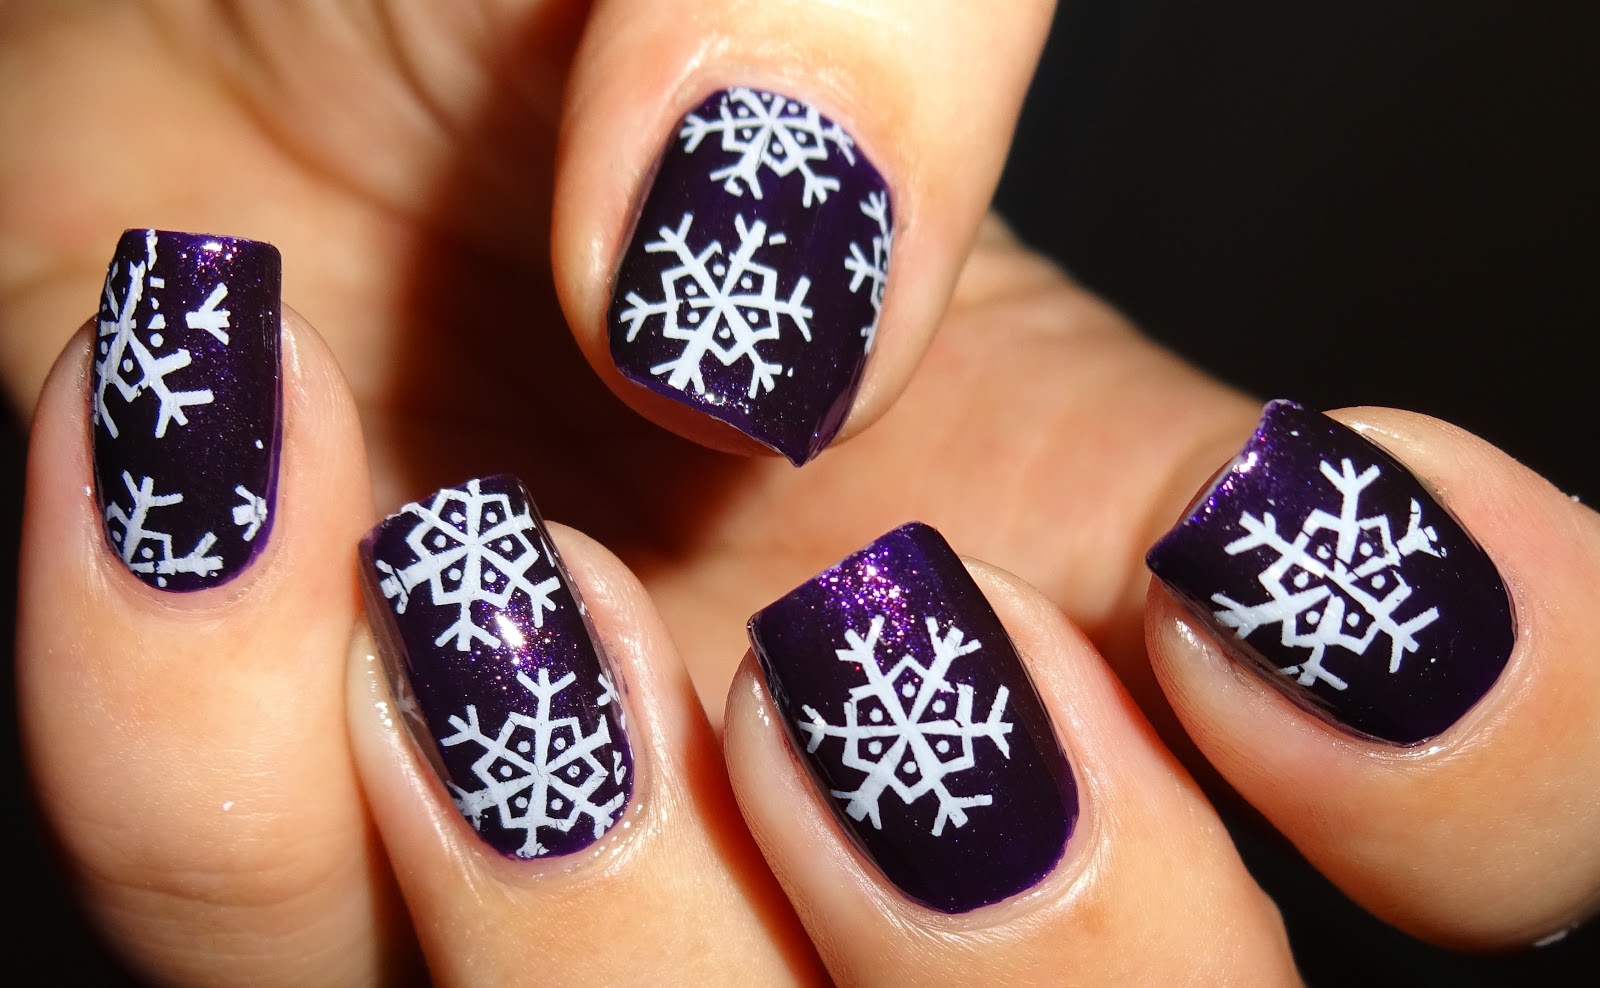 Wendy's Delights: Iced Snowflake Nail Foil from Sparkly Nails